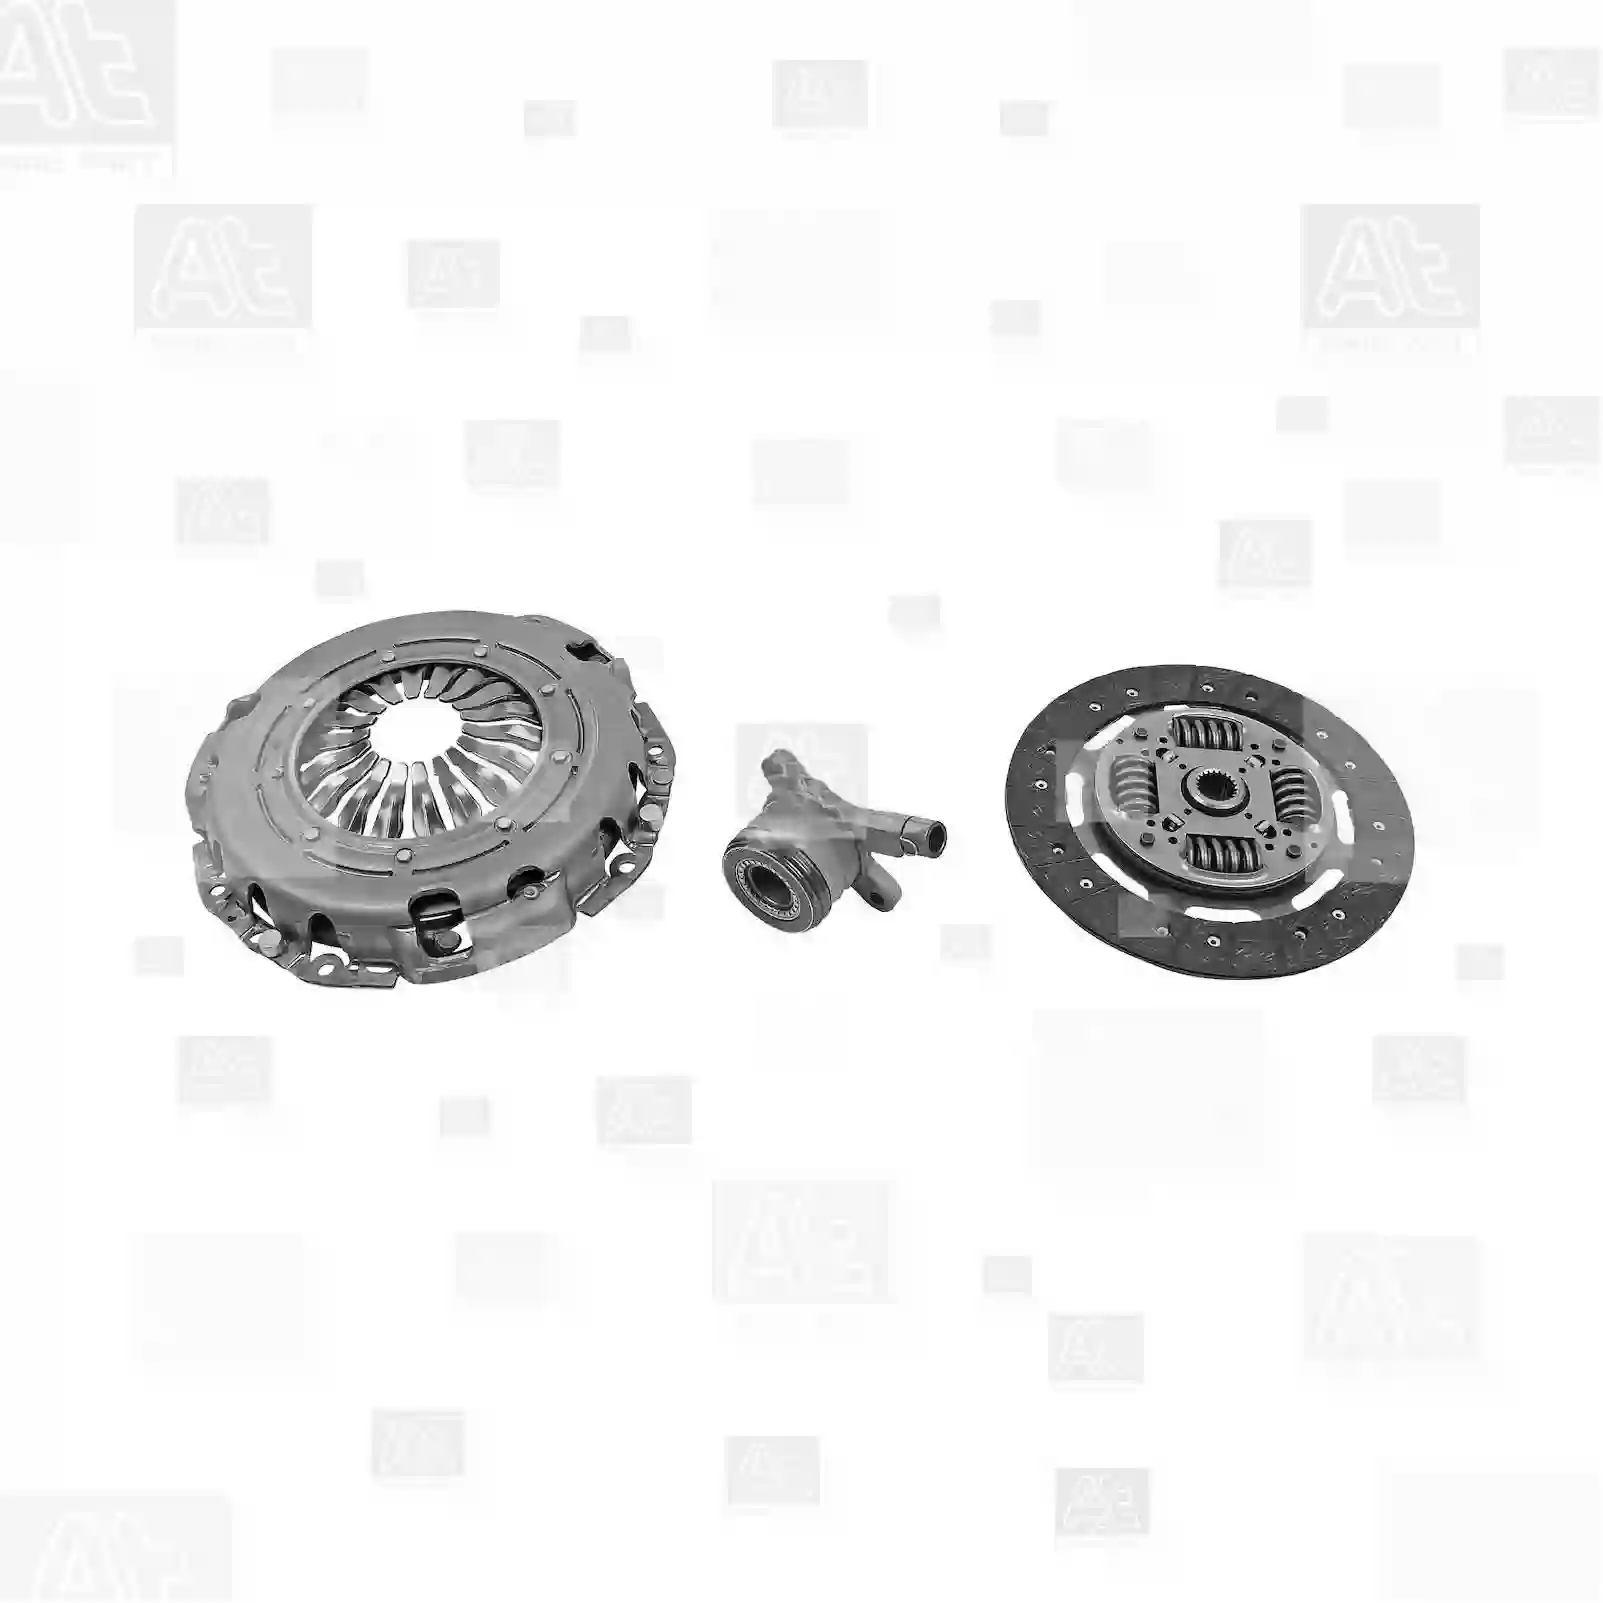 Clutch kit, 77722950, 9111848S2, 93184671S2, 93188685S2, 93190017S2, 93192601S2, 93198214S2, 93198480S2, 93198584S2, 93198910S2, 30001-00Q1AS2, 30001-00Q1DS2, 30001-00Q1KS2, 30001-00Q2AS2, 30001-00QADS2, 4403848S2, 4416025S2, 4416563S2, 4417187S2, 4418142S2, 4423519S2, 4433935S2, 4435190S2, 4449206S2, 7701479080S2 ||  77722950 At Spare Part | Engine, Accelerator Pedal, Camshaft, Connecting Rod, Crankcase, Crankshaft, Cylinder Head, Engine Suspension Mountings, Exhaust Manifold, Exhaust Gas Recirculation, Filter Kits, Flywheel Housing, General Overhaul Kits, Engine, Intake Manifold, Oil Cleaner, Oil Cooler, Oil Filter, Oil Pump, Oil Sump, Piston & Liner, Sensor & Switch, Timing Case, Turbocharger, Cooling System, Belt Tensioner, Coolant Filter, Coolant Pipe, Corrosion Prevention Agent, Drive, Expansion Tank, Fan, Intercooler, Monitors & Gauges, Radiator, Thermostat, V-Belt / Timing belt, Water Pump, Fuel System, Electronical Injector Unit, Feed Pump, Fuel Filter, cpl., Fuel Gauge Sender,  Fuel Line, Fuel Pump, Fuel Tank, Injection Line Kit, Injection Pump, Exhaust System, Clutch & Pedal, Gearbox, Propeller Shaft, Axles, Brake System, Hubs & Wheels, Suspension, Leaf Spring, Universal Parts / Accessories, Steering, Electrical System, Cabin Clutch kit, 77722950, 9111848S2, 93184671S2, 93188685S2, 93190017S2, 93192601S2, 93198214S2, 93198480S2, 93198584S2, 93198910S2, 30001-00Q1AS2, 30001-00Q1DS2, 30001-00Q1KS2, 30001-00Q2AS2, 30001-00QADS2, 4403848S2, 4416025S2, 4416563S2, 4417187S2, 4418142S2, 4423519S2, 4433935S2, 4435190S2, 4449206S2, 7701479080S2 ||  77722950 At Spare Part | Engine, Accelerator Pedal, Camshaft, Connecting Rod, Crankcase, Crankshaft, Cylinder Head, Engine Suspension Mountings, Exhaust Manifold, Exhaust Gas Recirculation, Filter Kits, Flywheel Housing, General Overhaul Kits, Engine, Intake Manifold, Oil Cleaner, Oil Cooler, Oil Filter, Oil Pump, Oil Sump, Piston & Liner, Sensor & Switch, Timing Case, Turbocharger, Cooling System, Belt Tensioner, Coolant Filter, Coolant Pipe, Corrosion Prevention Agent, Drive, Expansion Tank, Fan, Intercooler, Monitors & Gauges, Radiator, Thermostat, V-Belt / Timing belt, Water Pump, Fuel System, Electronical Injector Unit, Feed Pump, Fuel Filter, cpl., Fuel Gauge Sender,  Fuel Line, Fuel Pump, Fuel Tank, Injection Line Kit, Injection Pump, Exhaust System, Clutch & Pedal, Gearbox, Propeller Shaft, Axles, Brake System, Hubs & Wheels, Suspension, Leaf Spring, Universal Parts / Accessories, Steering, Electrical System, Cabin